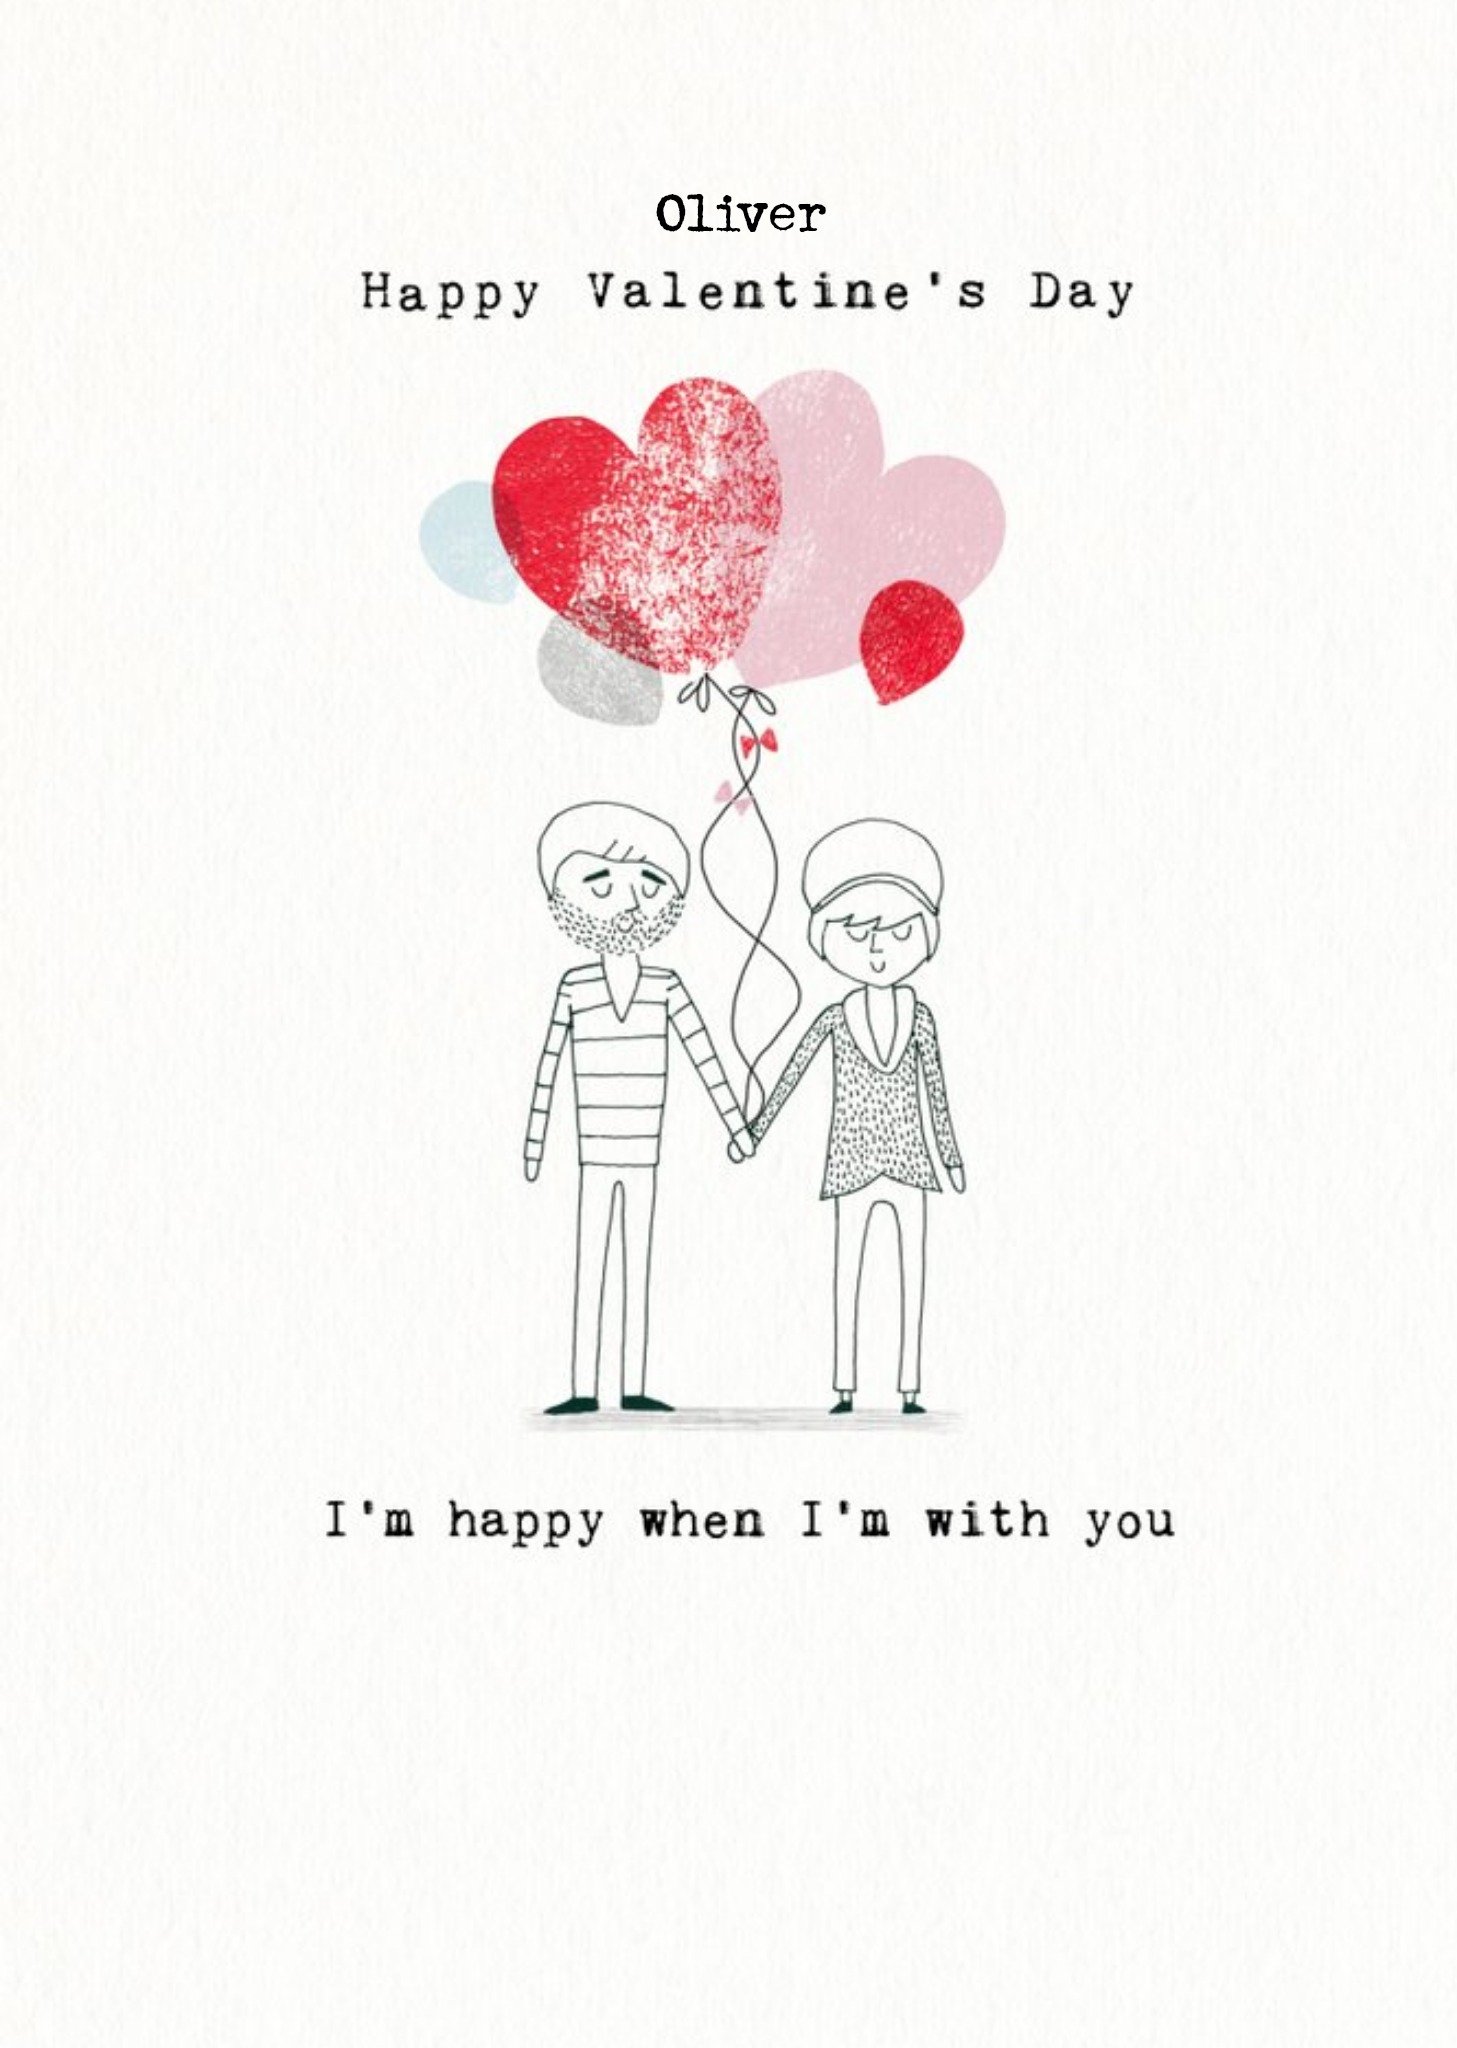 Idrew Illustrations Illustration Of A Happy Couple With Balloons Holding Hands Valentine's Day Card 